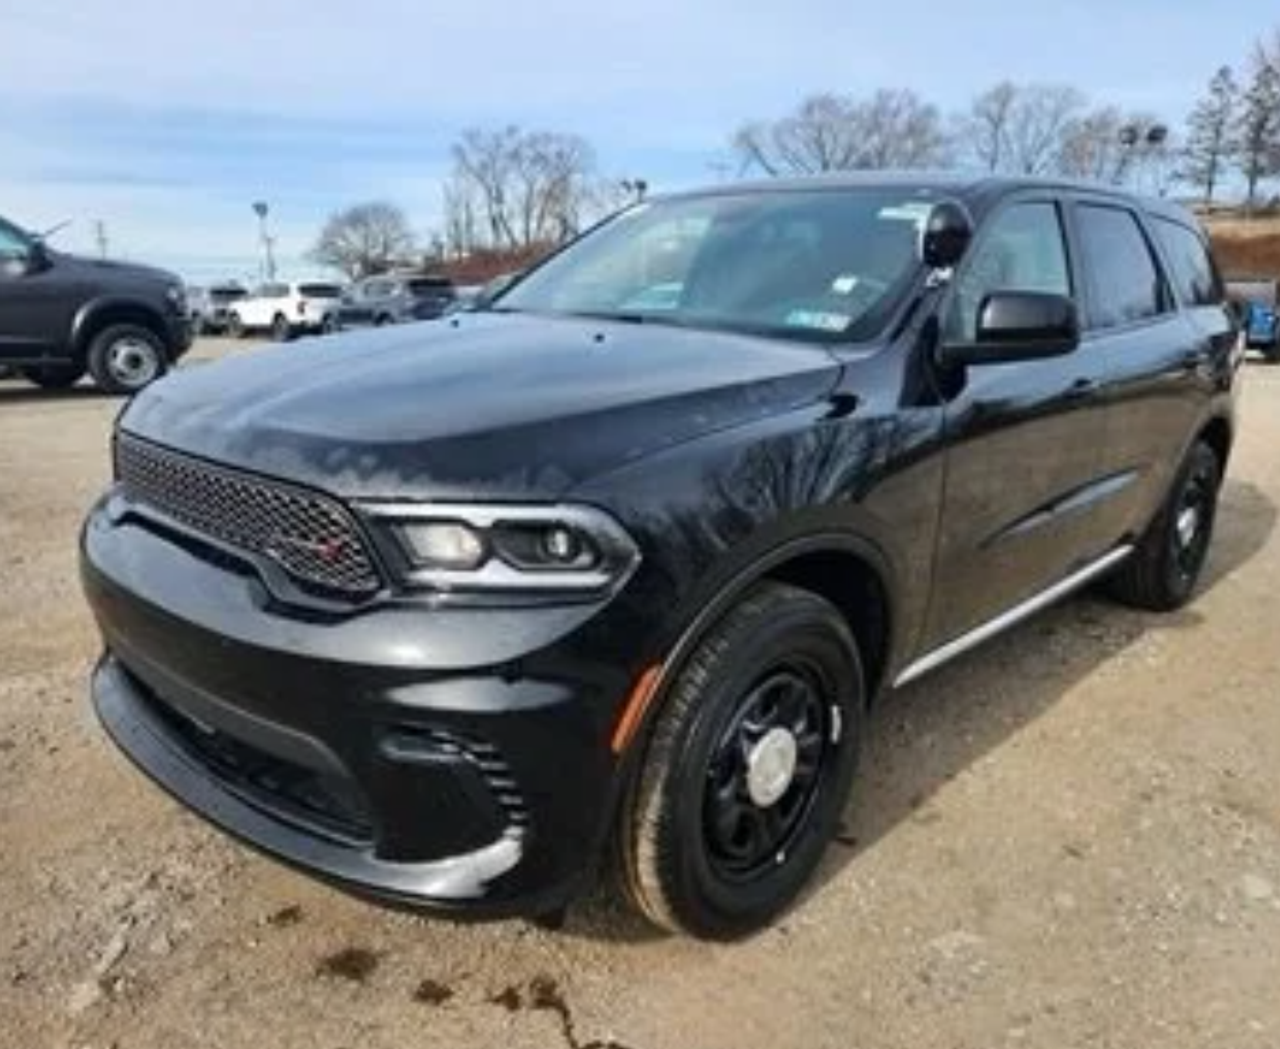 New 2023 Black Dodge Durango PPV V6 Police Package SUV AWD, ready to be built as a Marked Patrol Package (Emergency Lighting, Siren, Controller,  Console, Partition, etc.), + Delivery, DURMP6B5